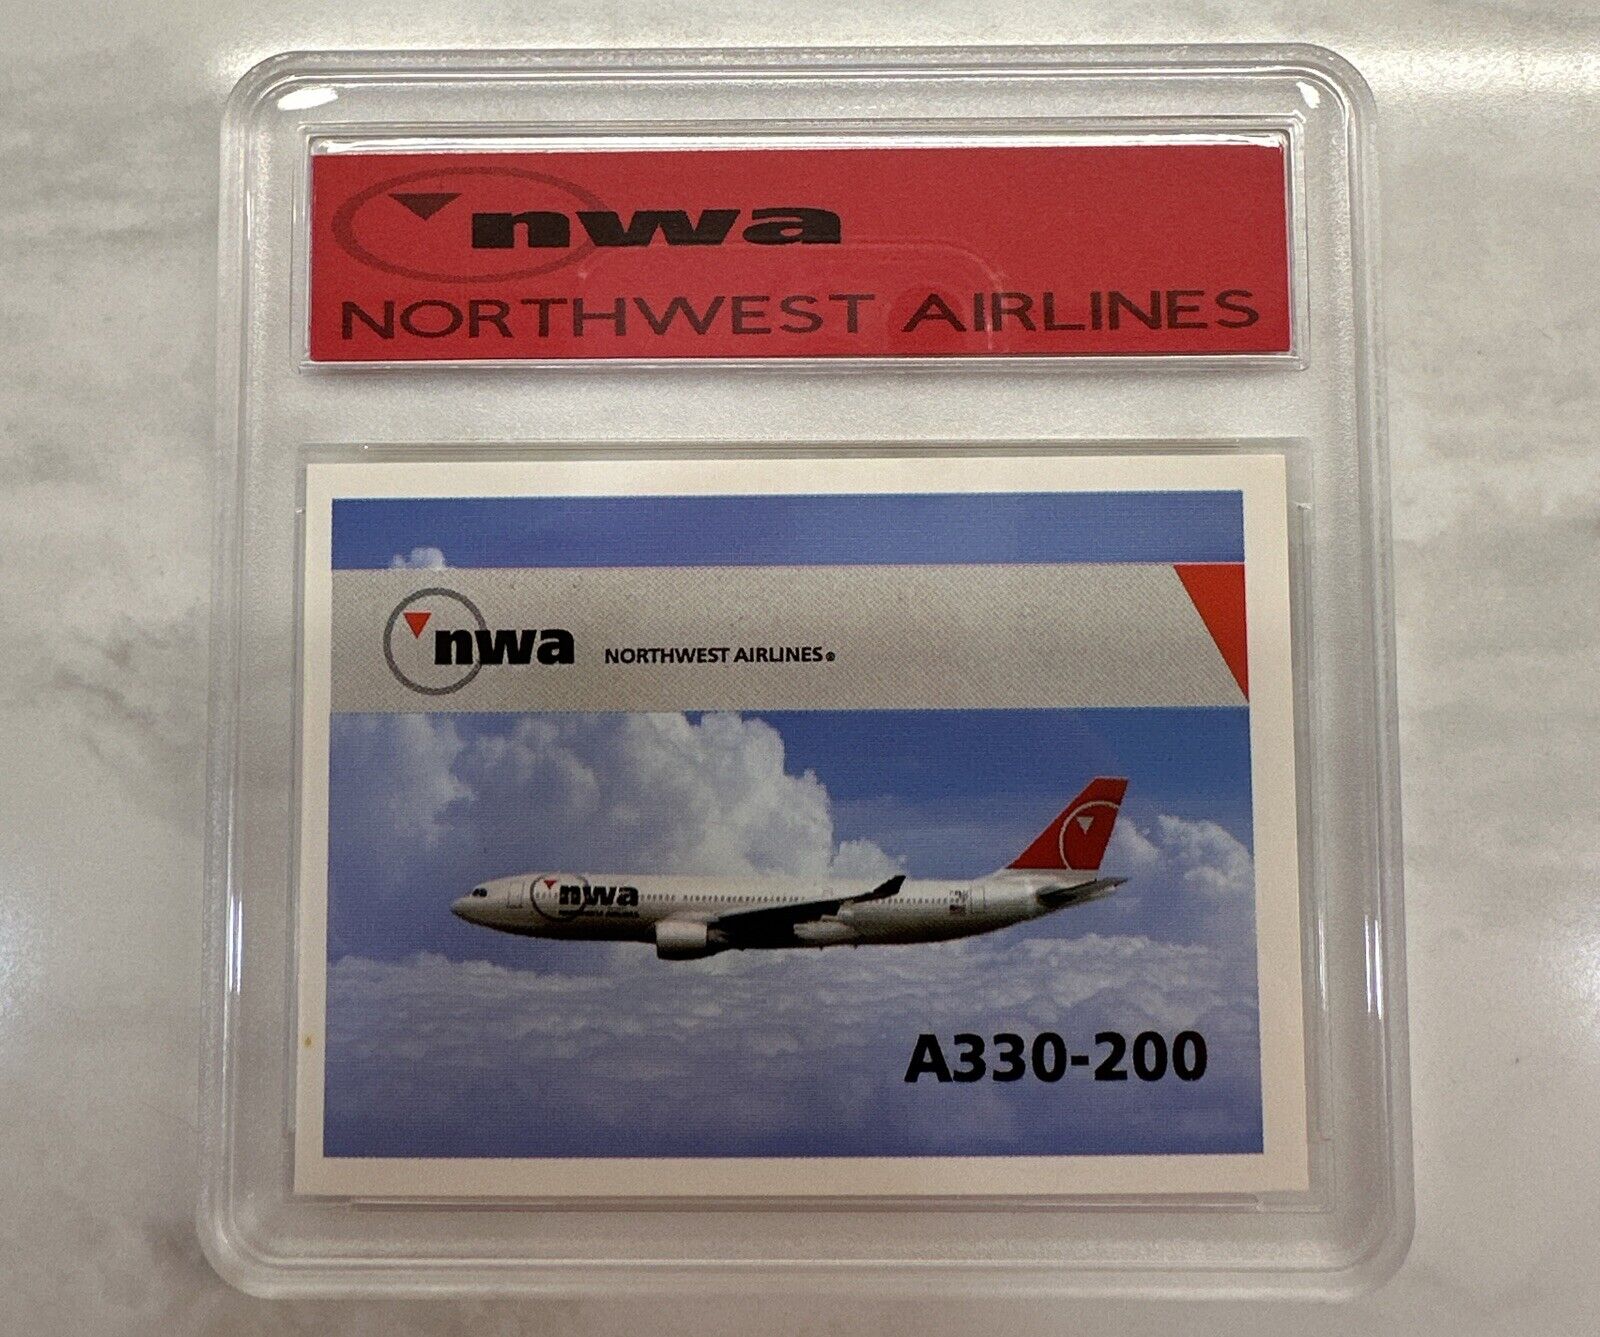 NORTHWEST AIRLINES PILOT TRADING CARD  A330-200 1990s DELTA HARD CASE MINT